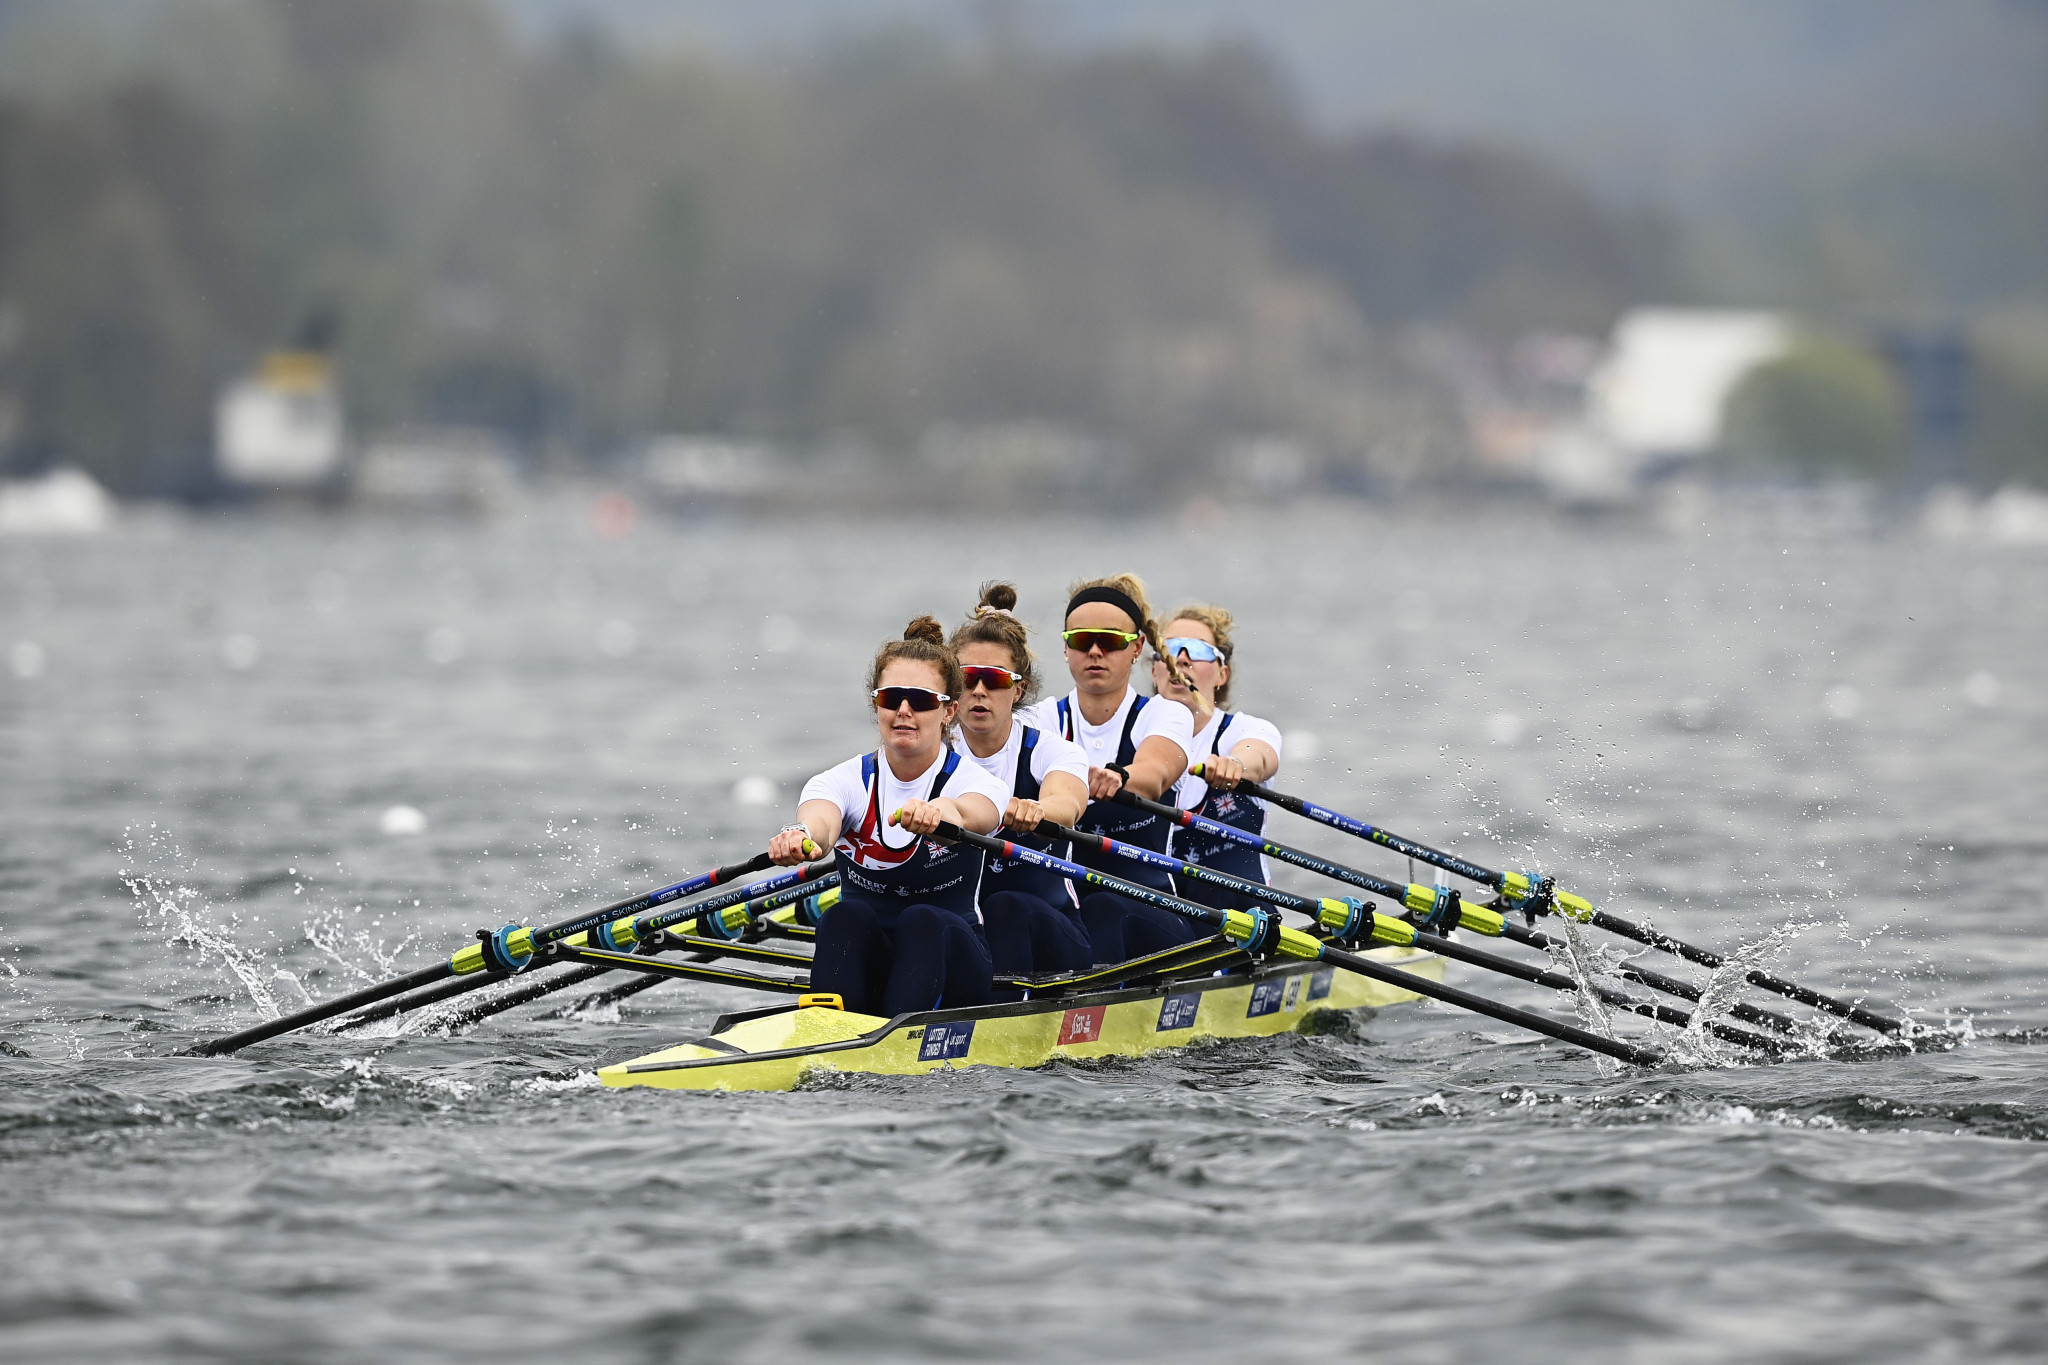 The GB team faced treacherous windy conditions in Hungary, but it did not stop them being victorious. GETTY IMAGES